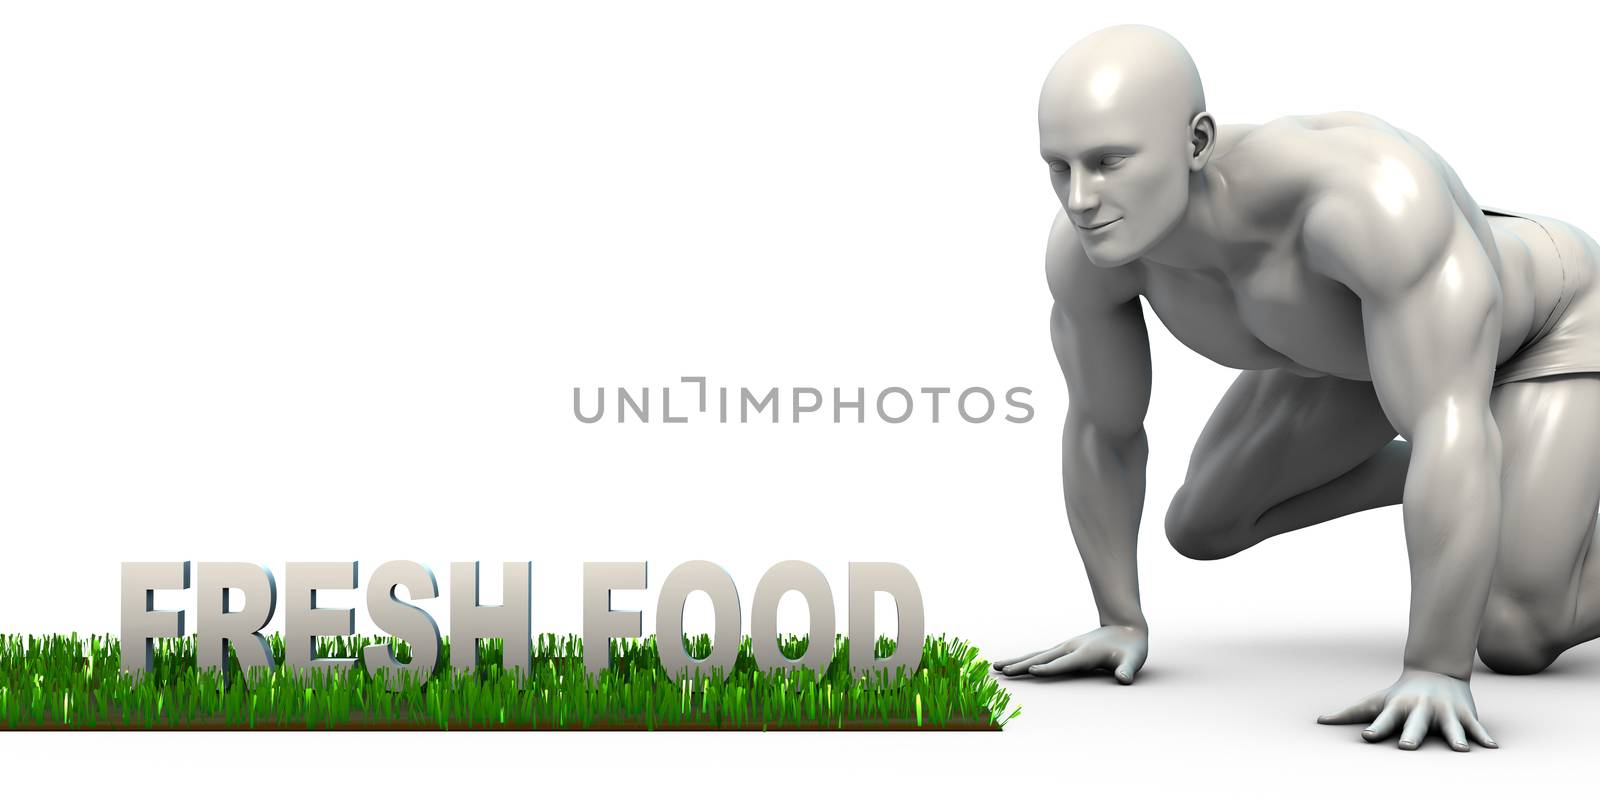 Fresh Food Concept with Man Looking Closely to Verify